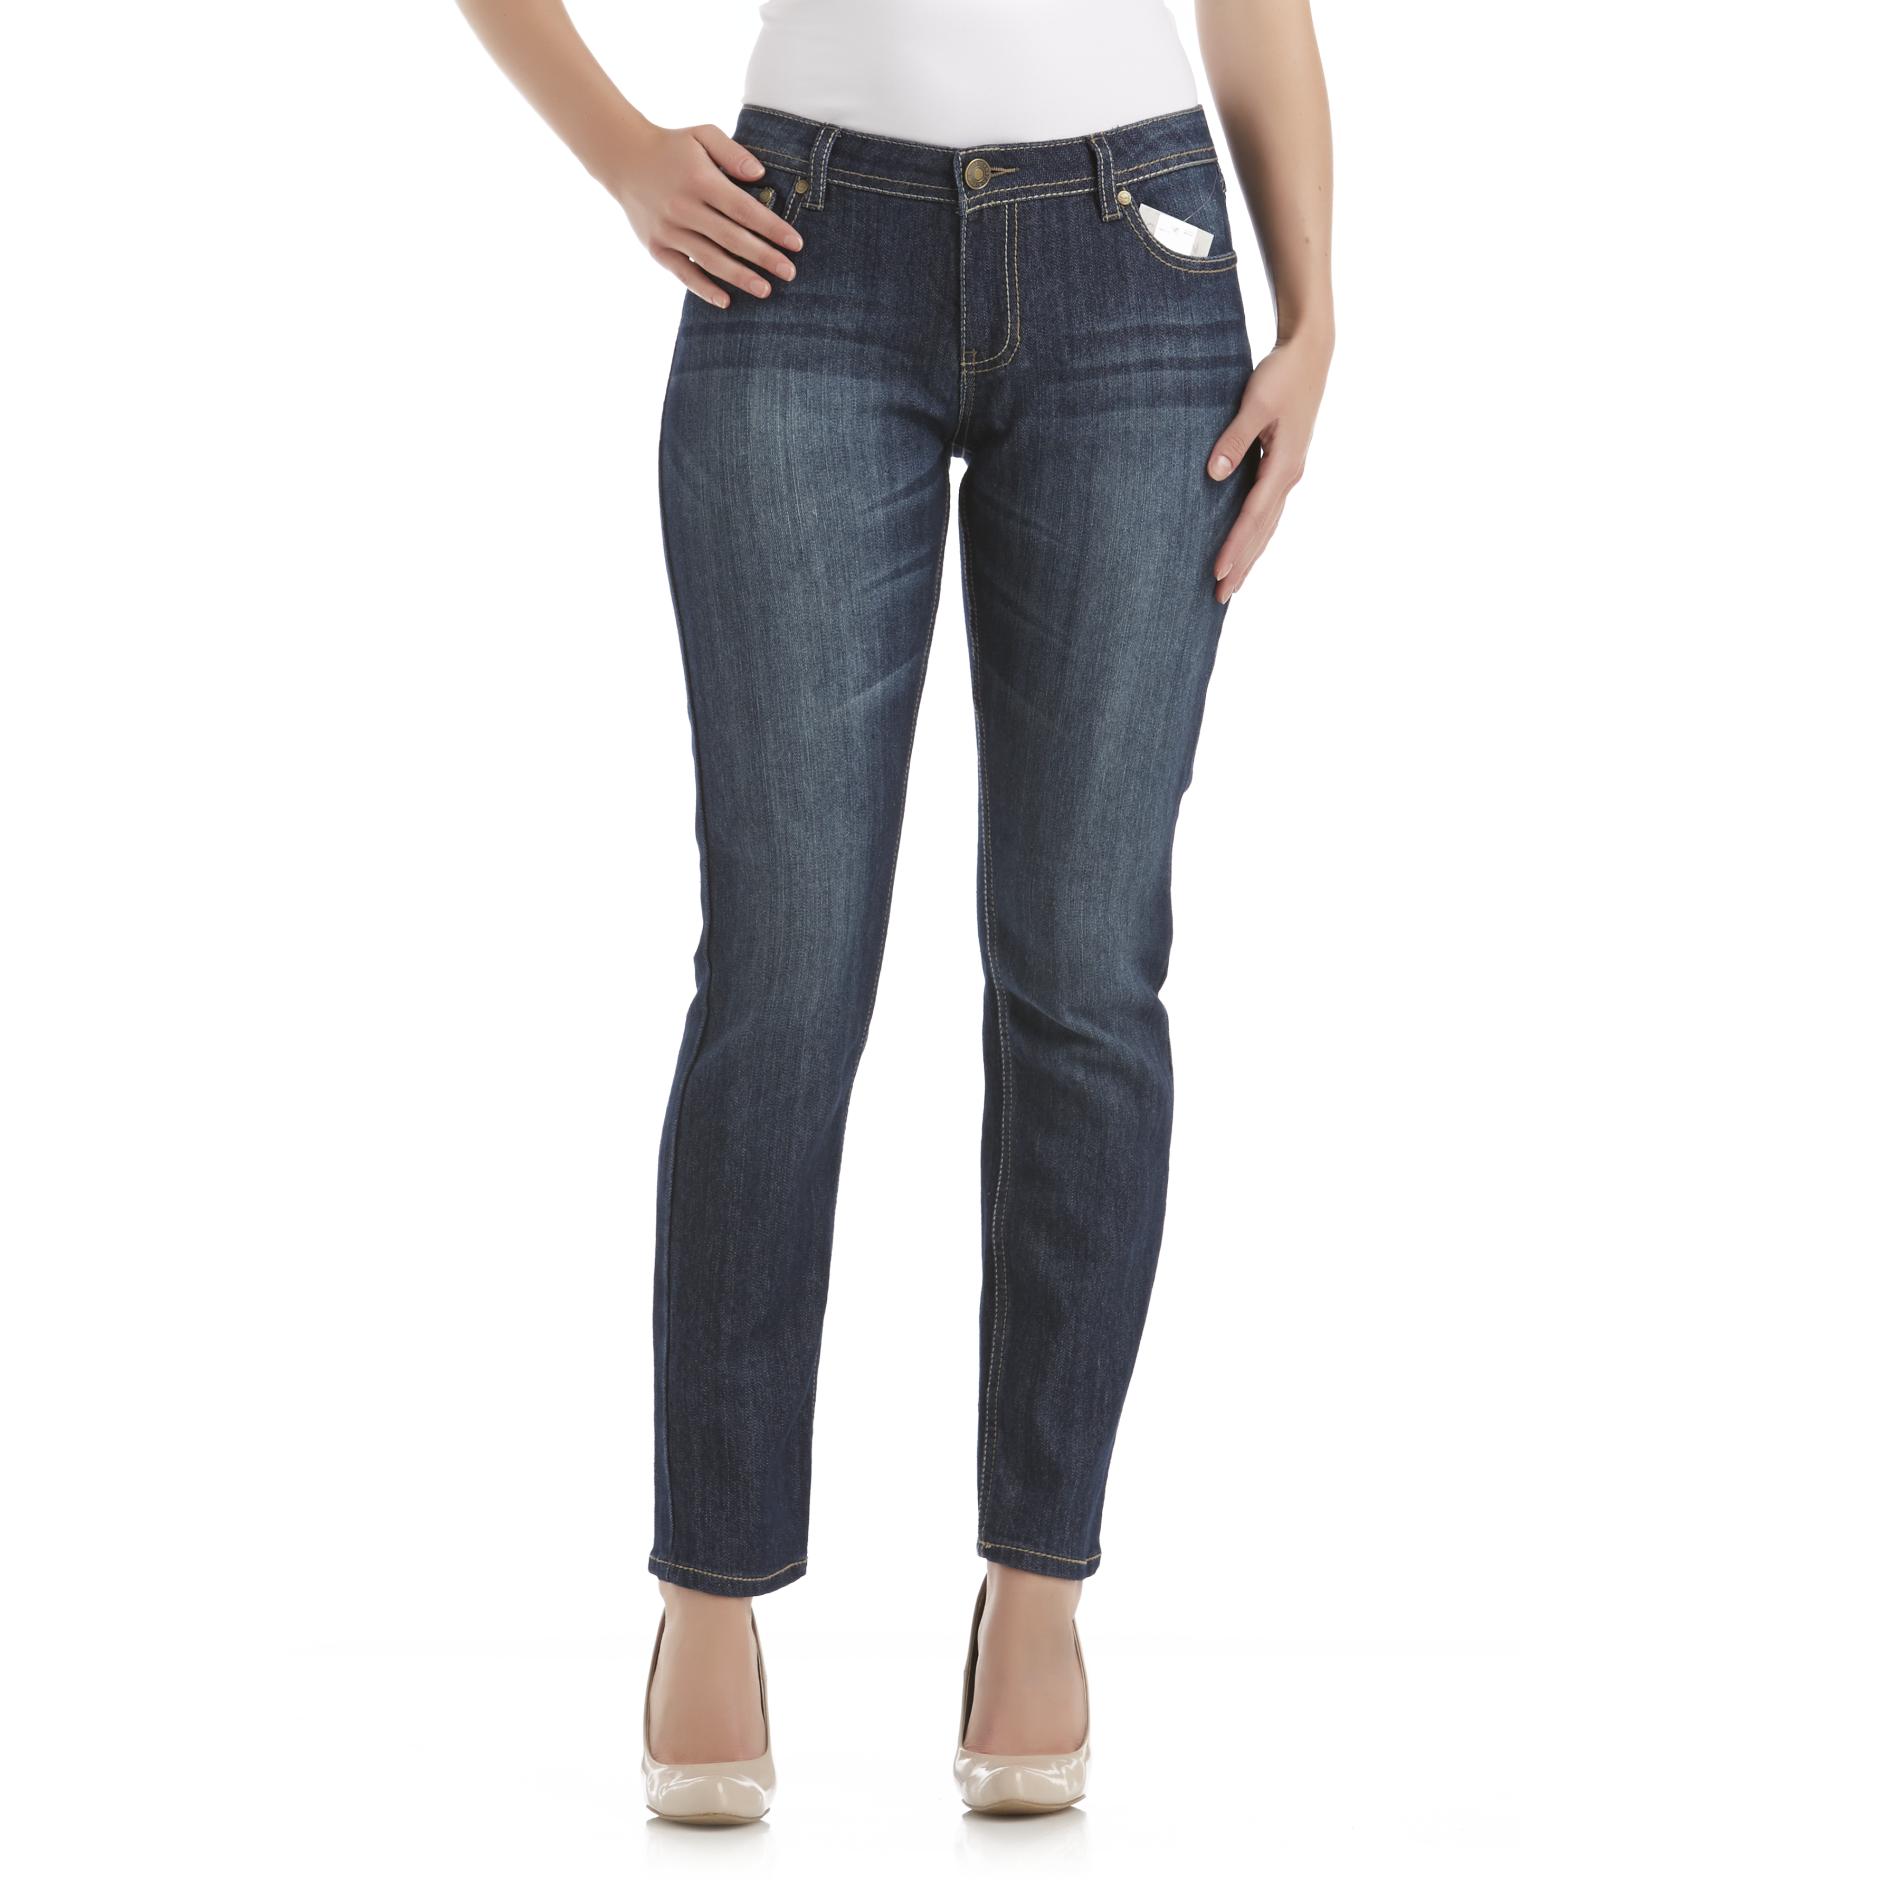 Canyon River Blues Women's Classic Skinny Jeans